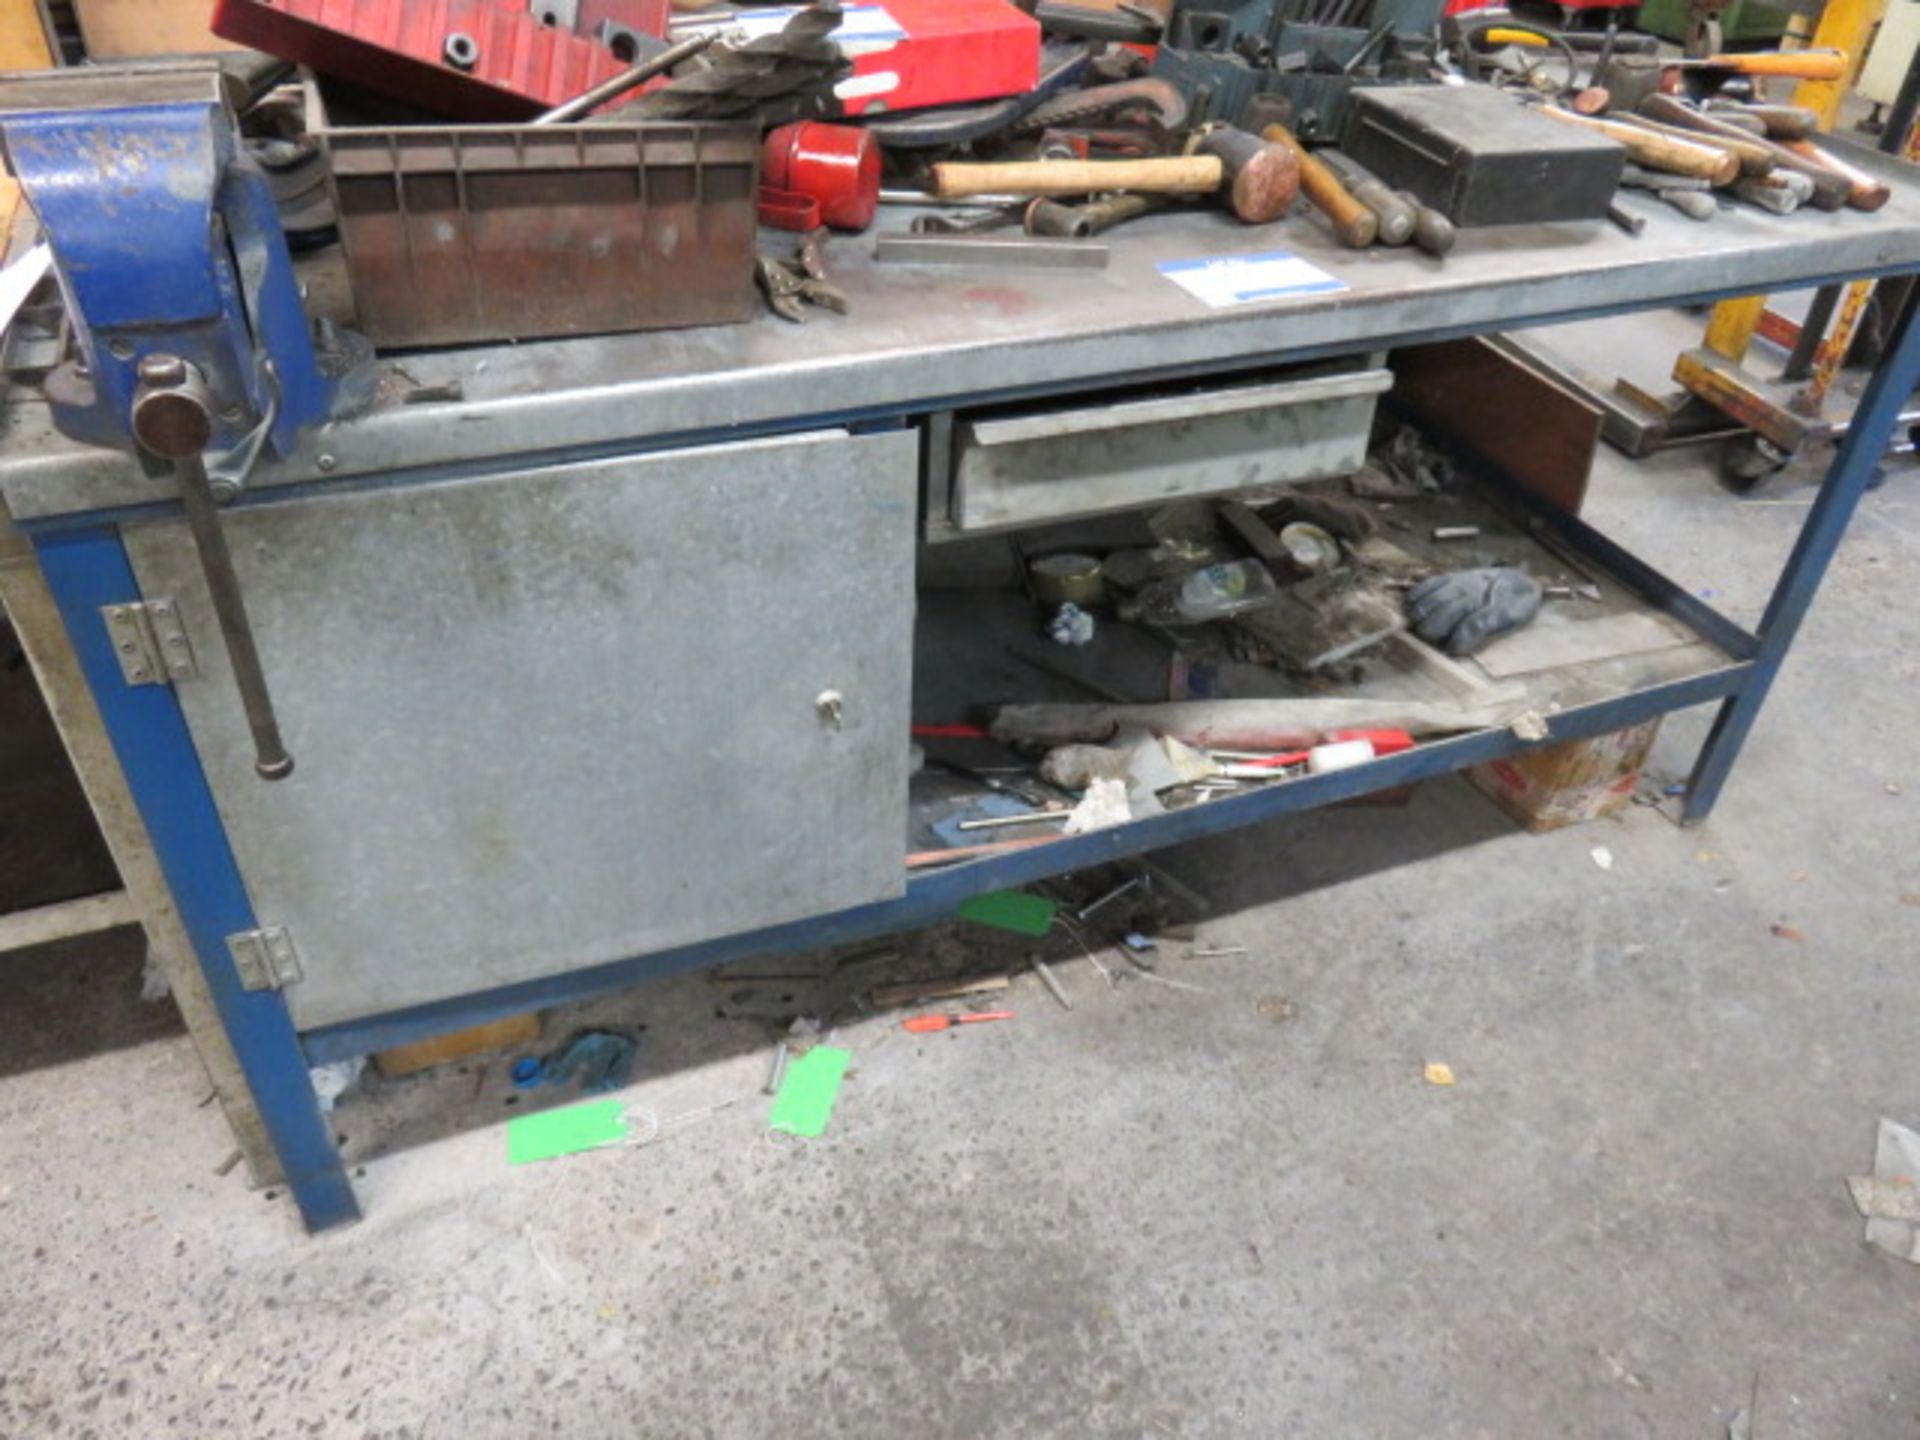 1830mm x 900mm Steel Work Benche with Record No. 23 4½ Bench Vice